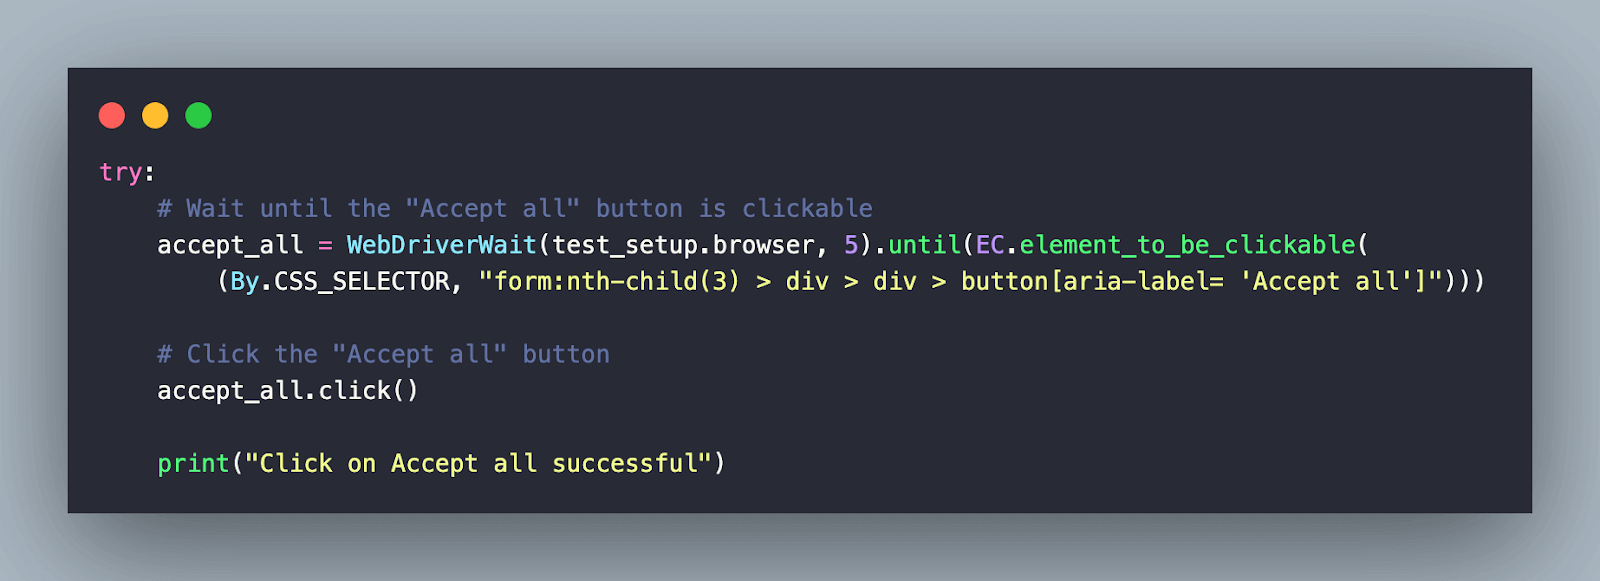 Accept All button using the CSS Selector